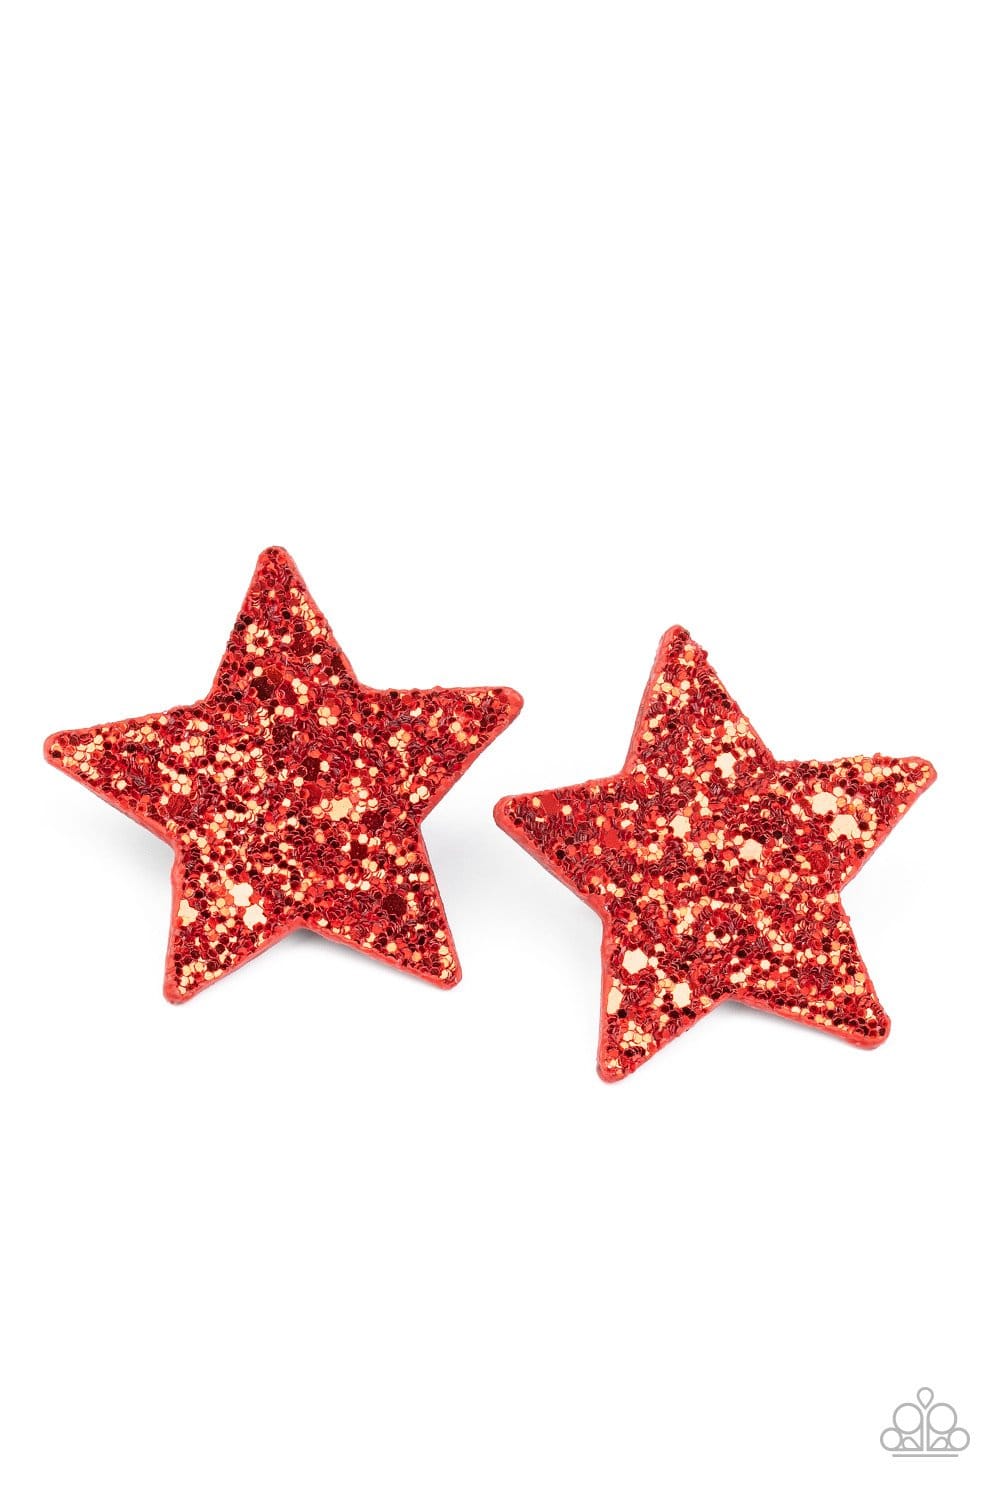 Paparazzi: Star-Spangled Superstar - Red Glittery Hair Clips - Jewels N’ Thingz Boutique